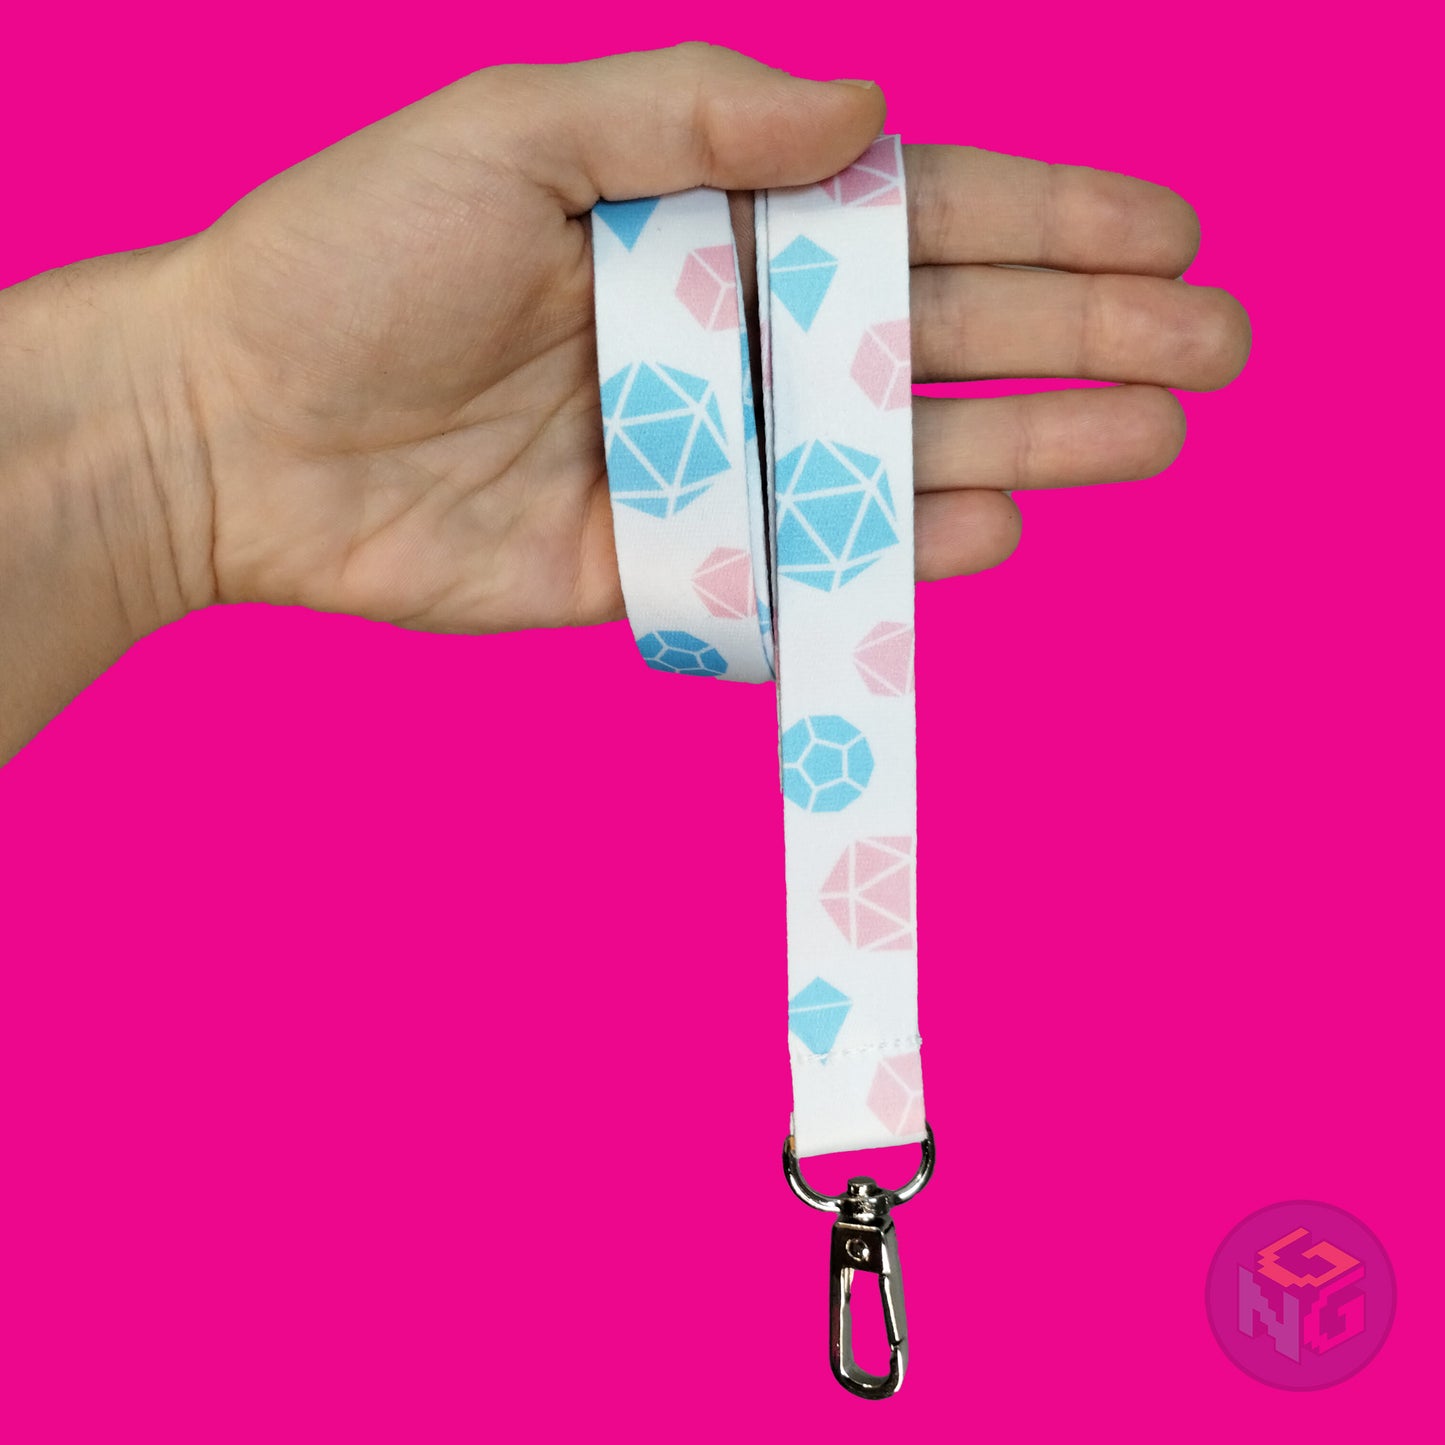 white transgender dice lanyard wrapped around a hand with the lobster clasp dangling against a pink background